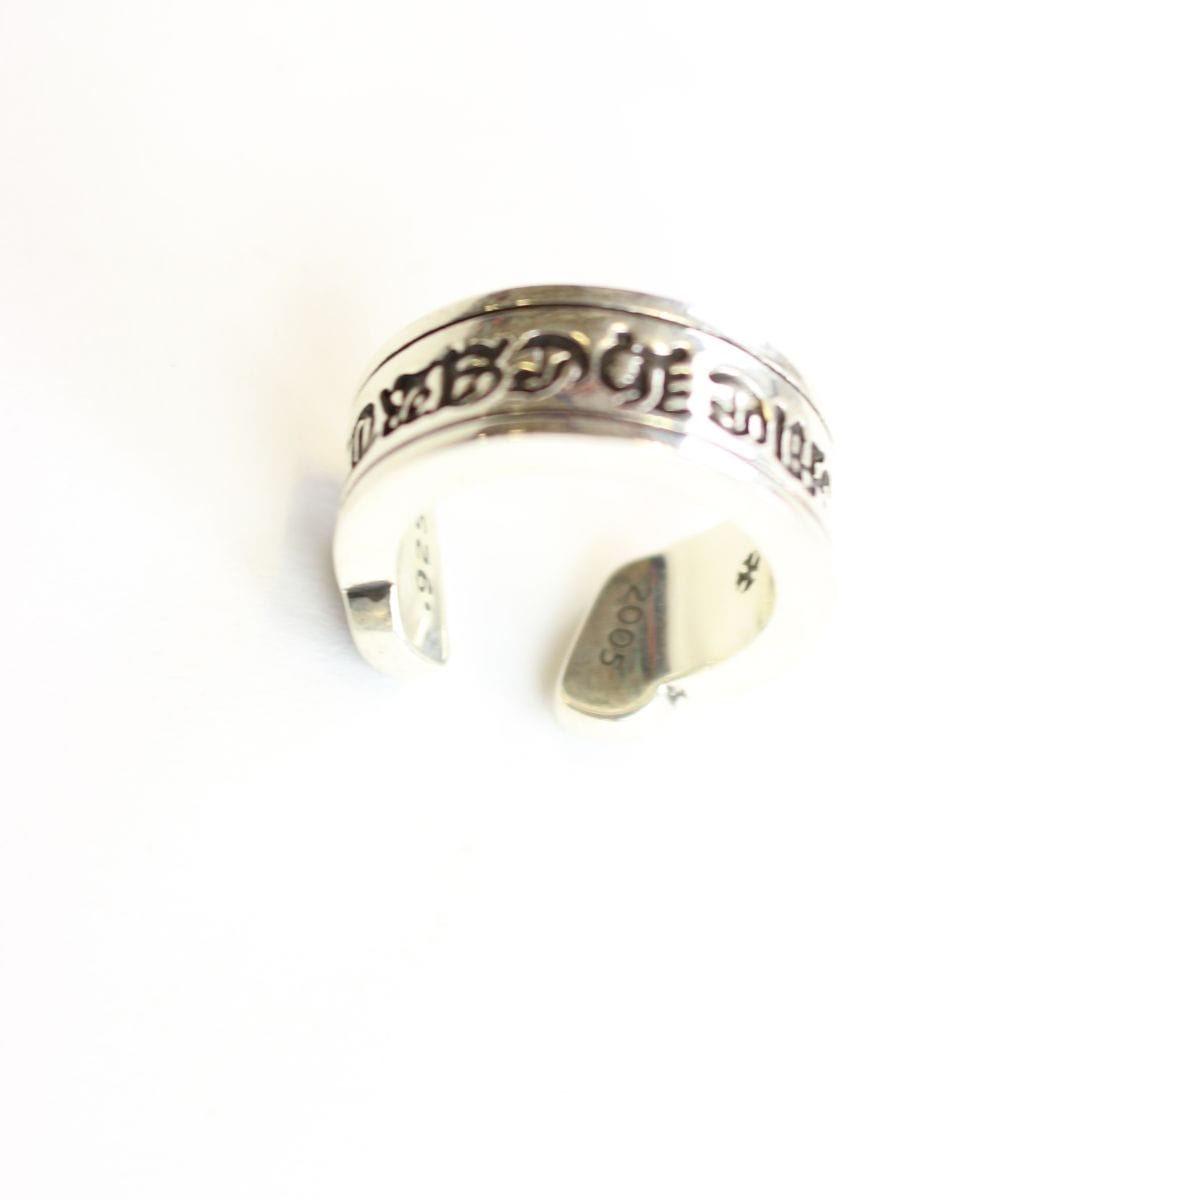 chrome hearts horseshoe scroll ring - SaruGeneral